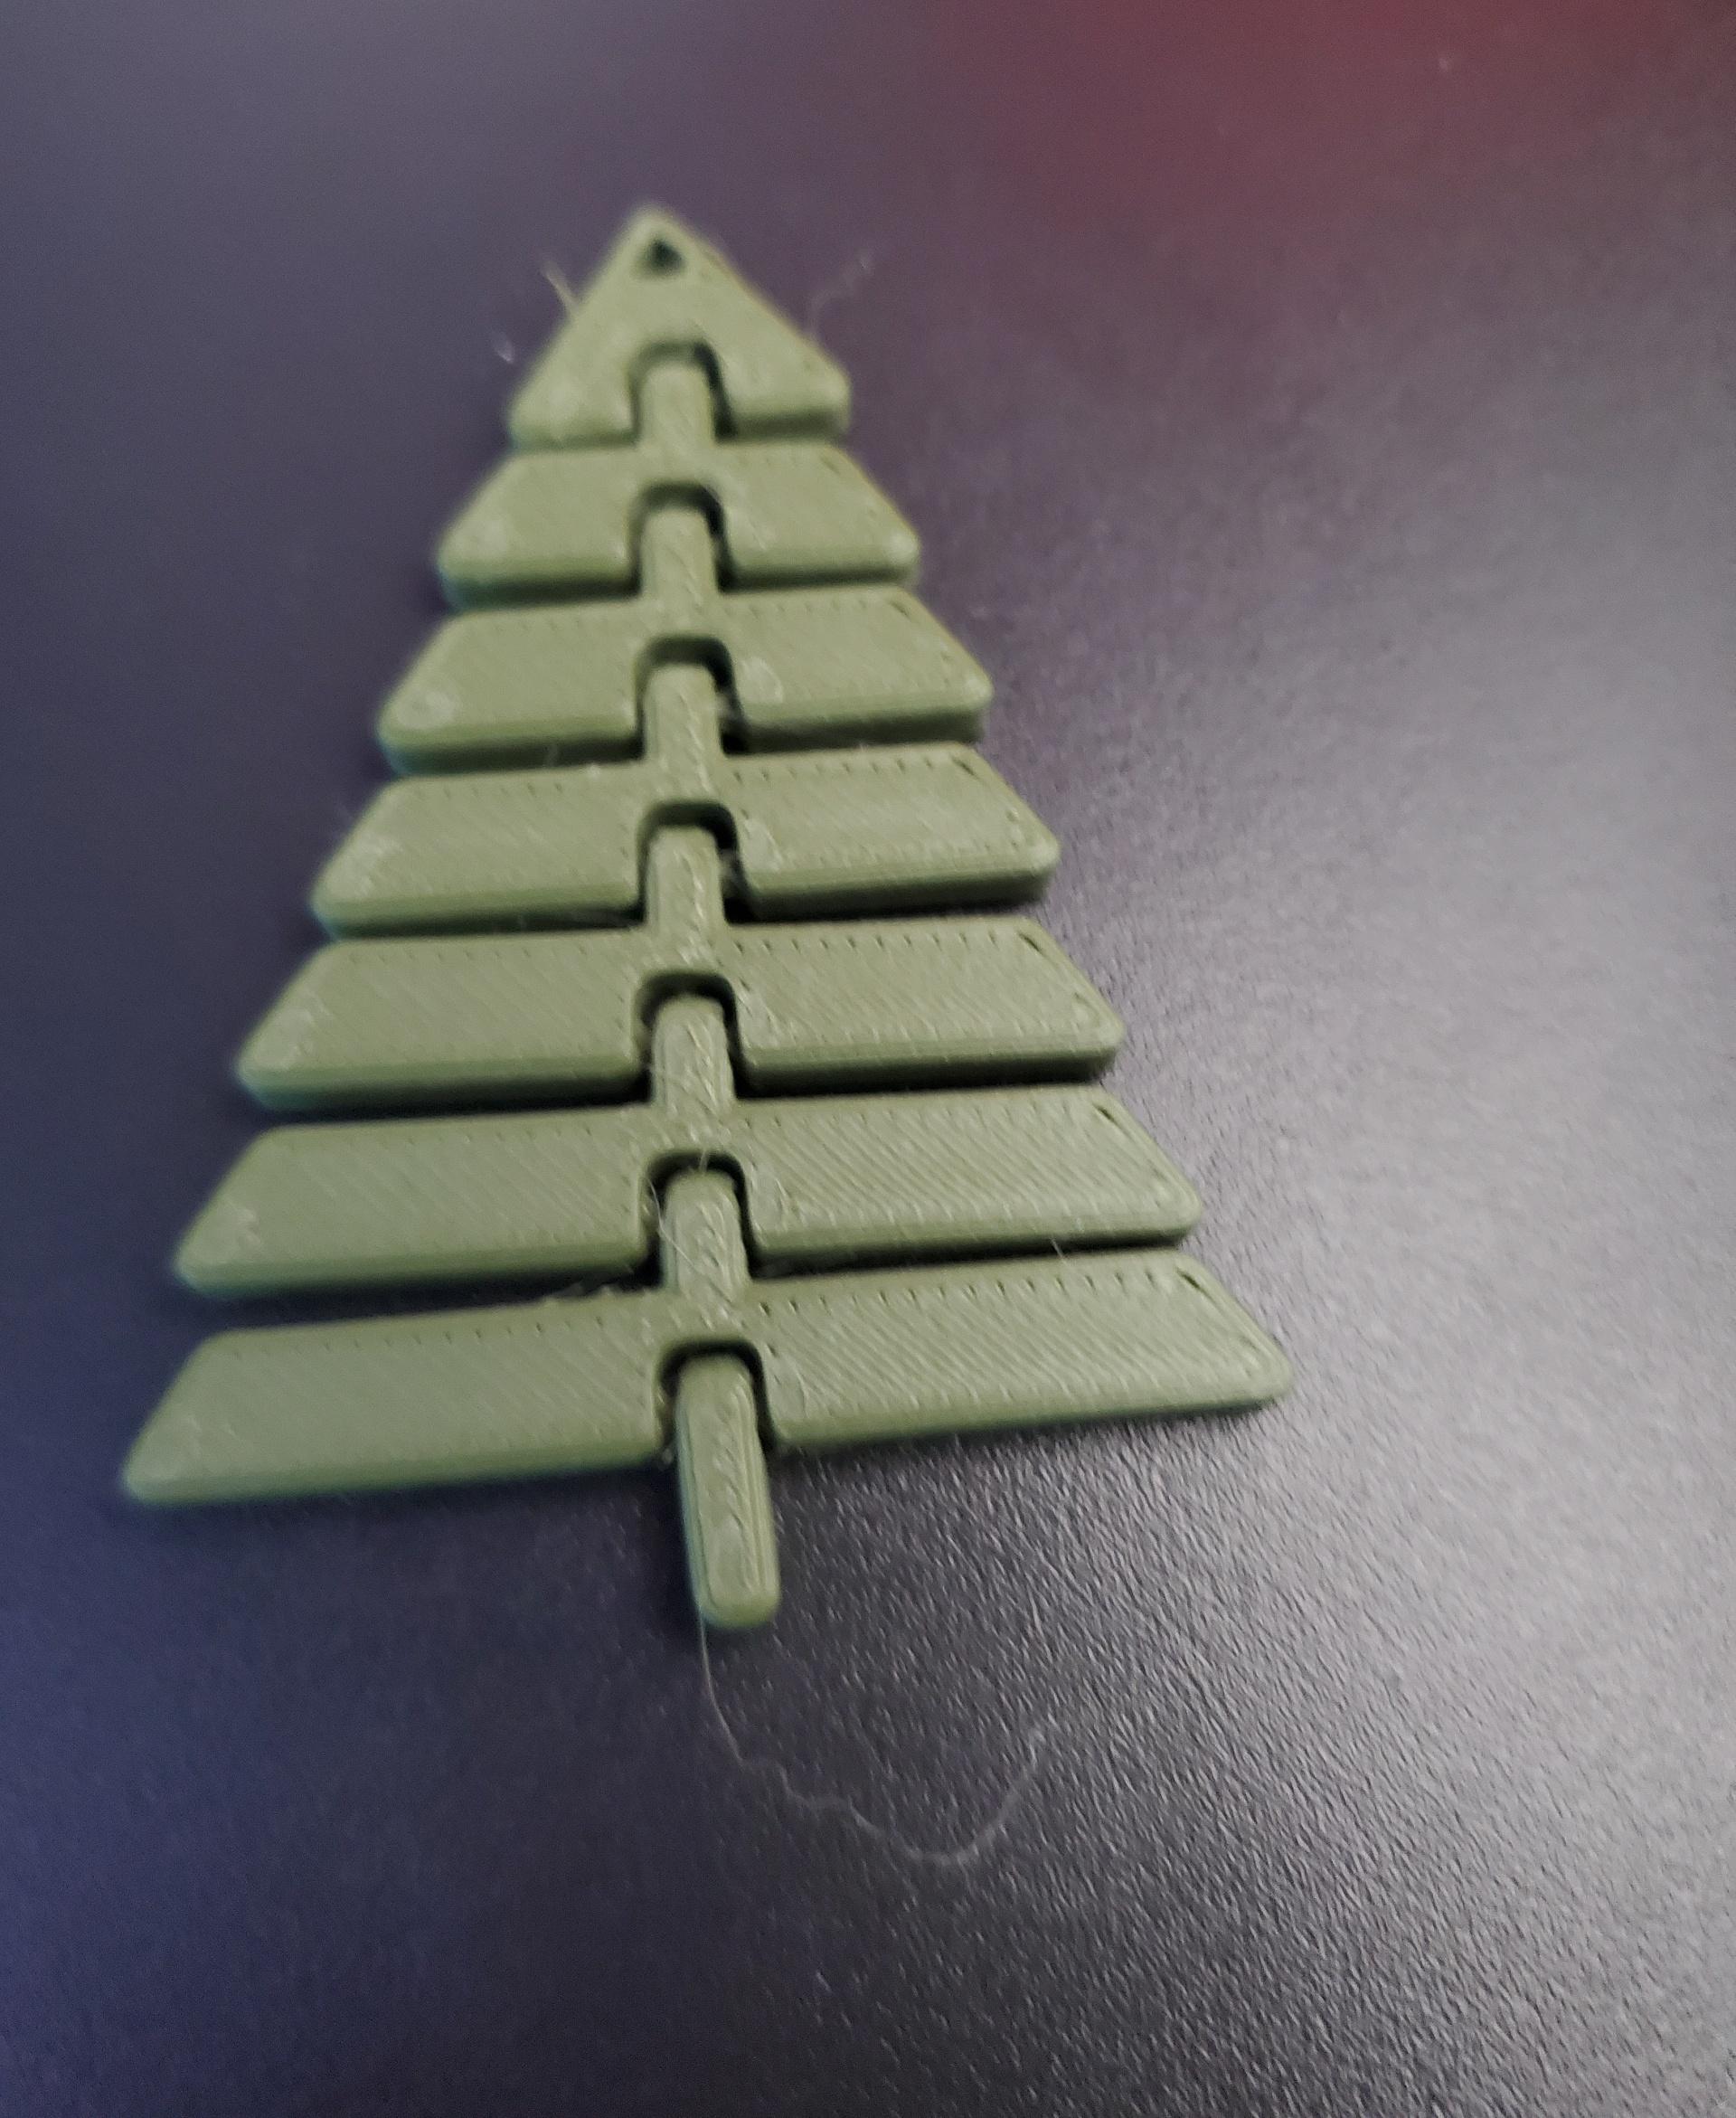 Articulated Christmas Tree Keychain - Print in place fidget toy - polyterra dark army green - 3d model